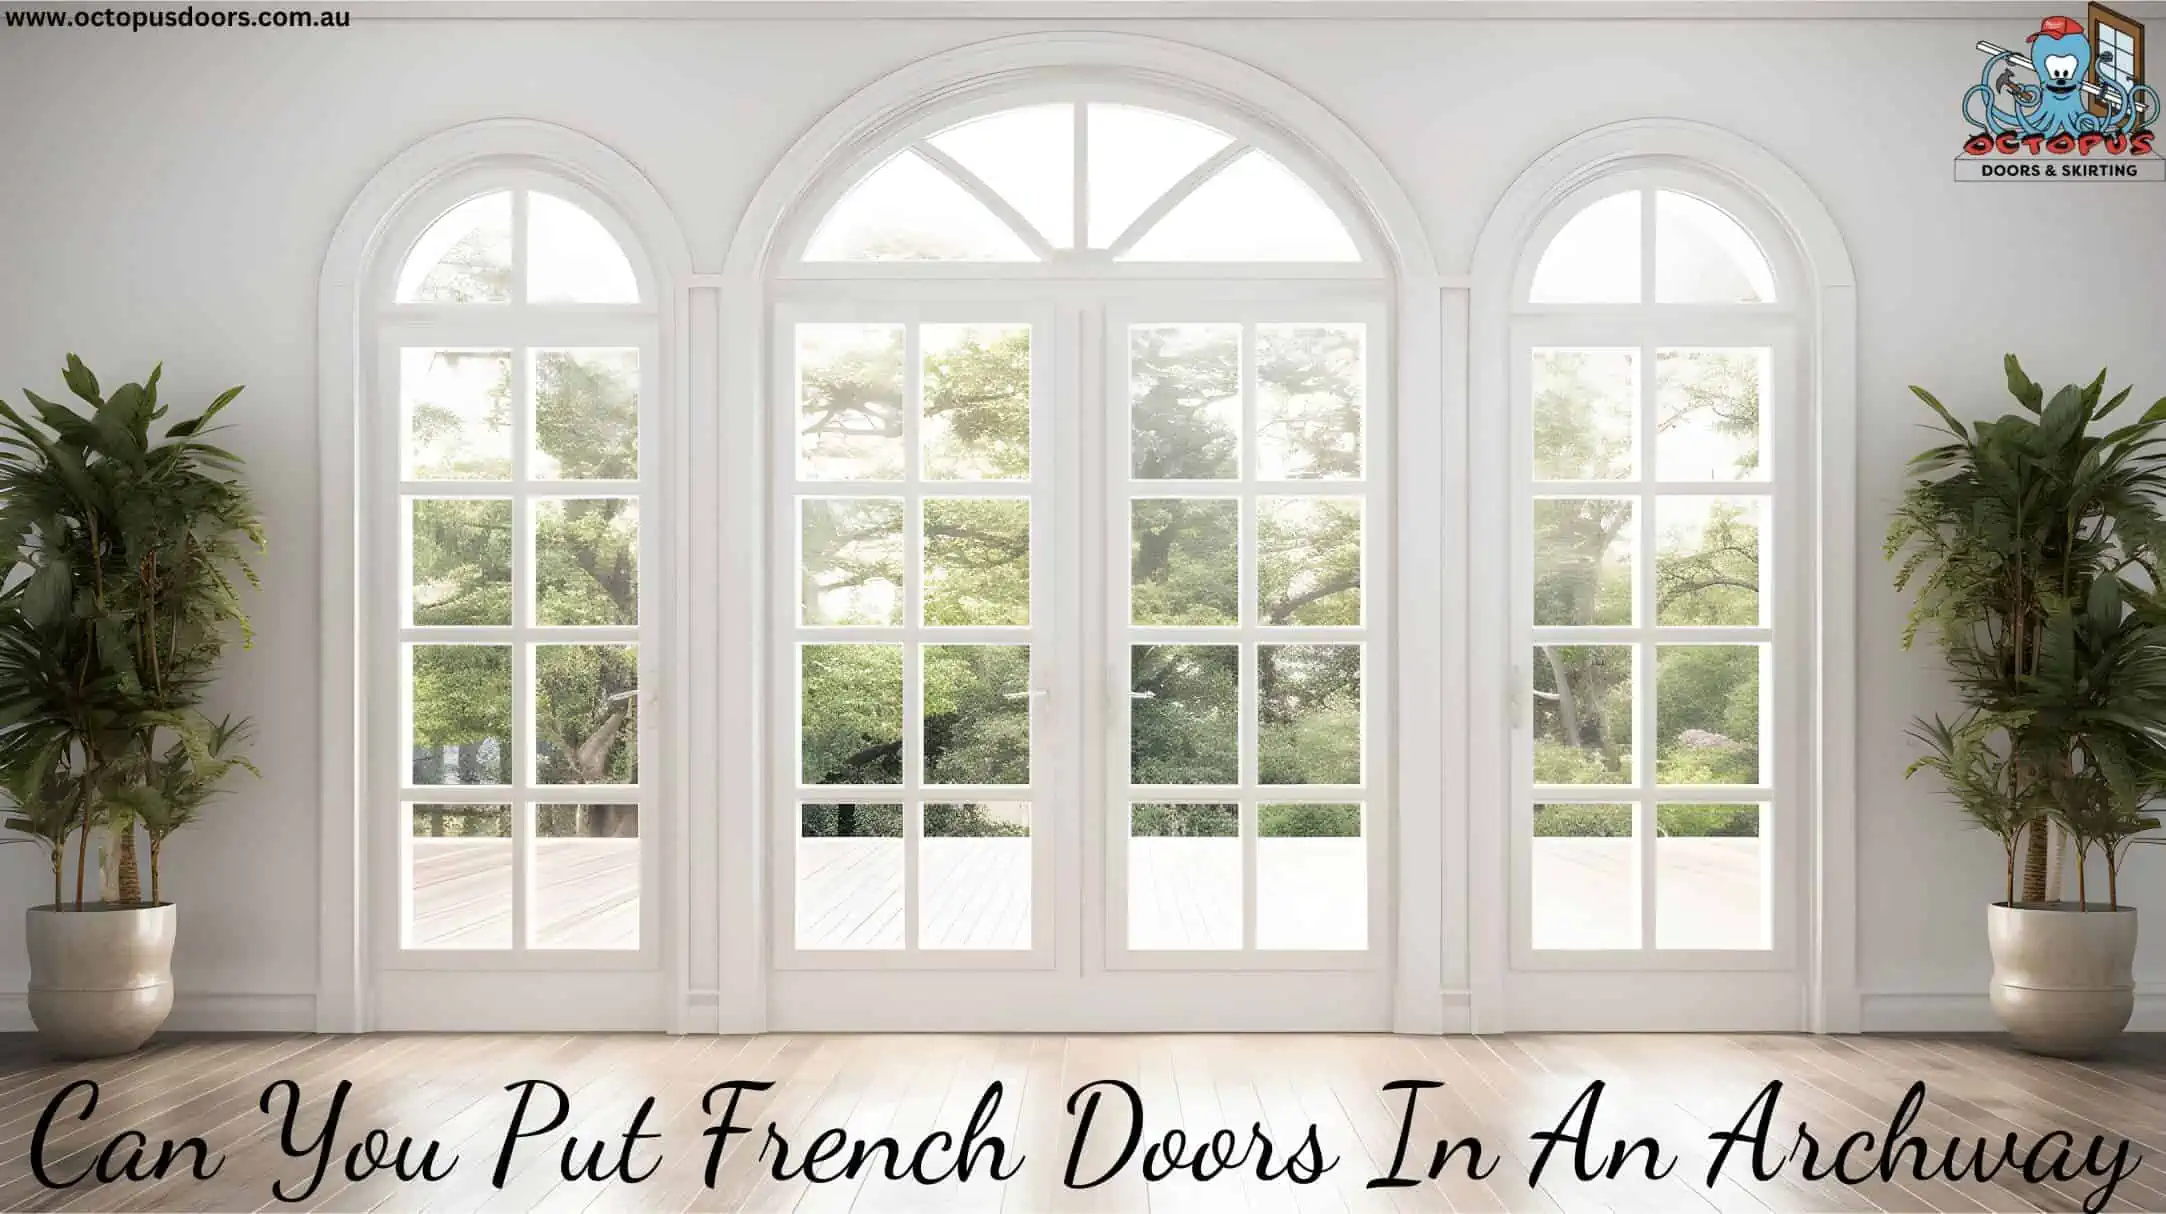 Can You Put French Doors In An Archway